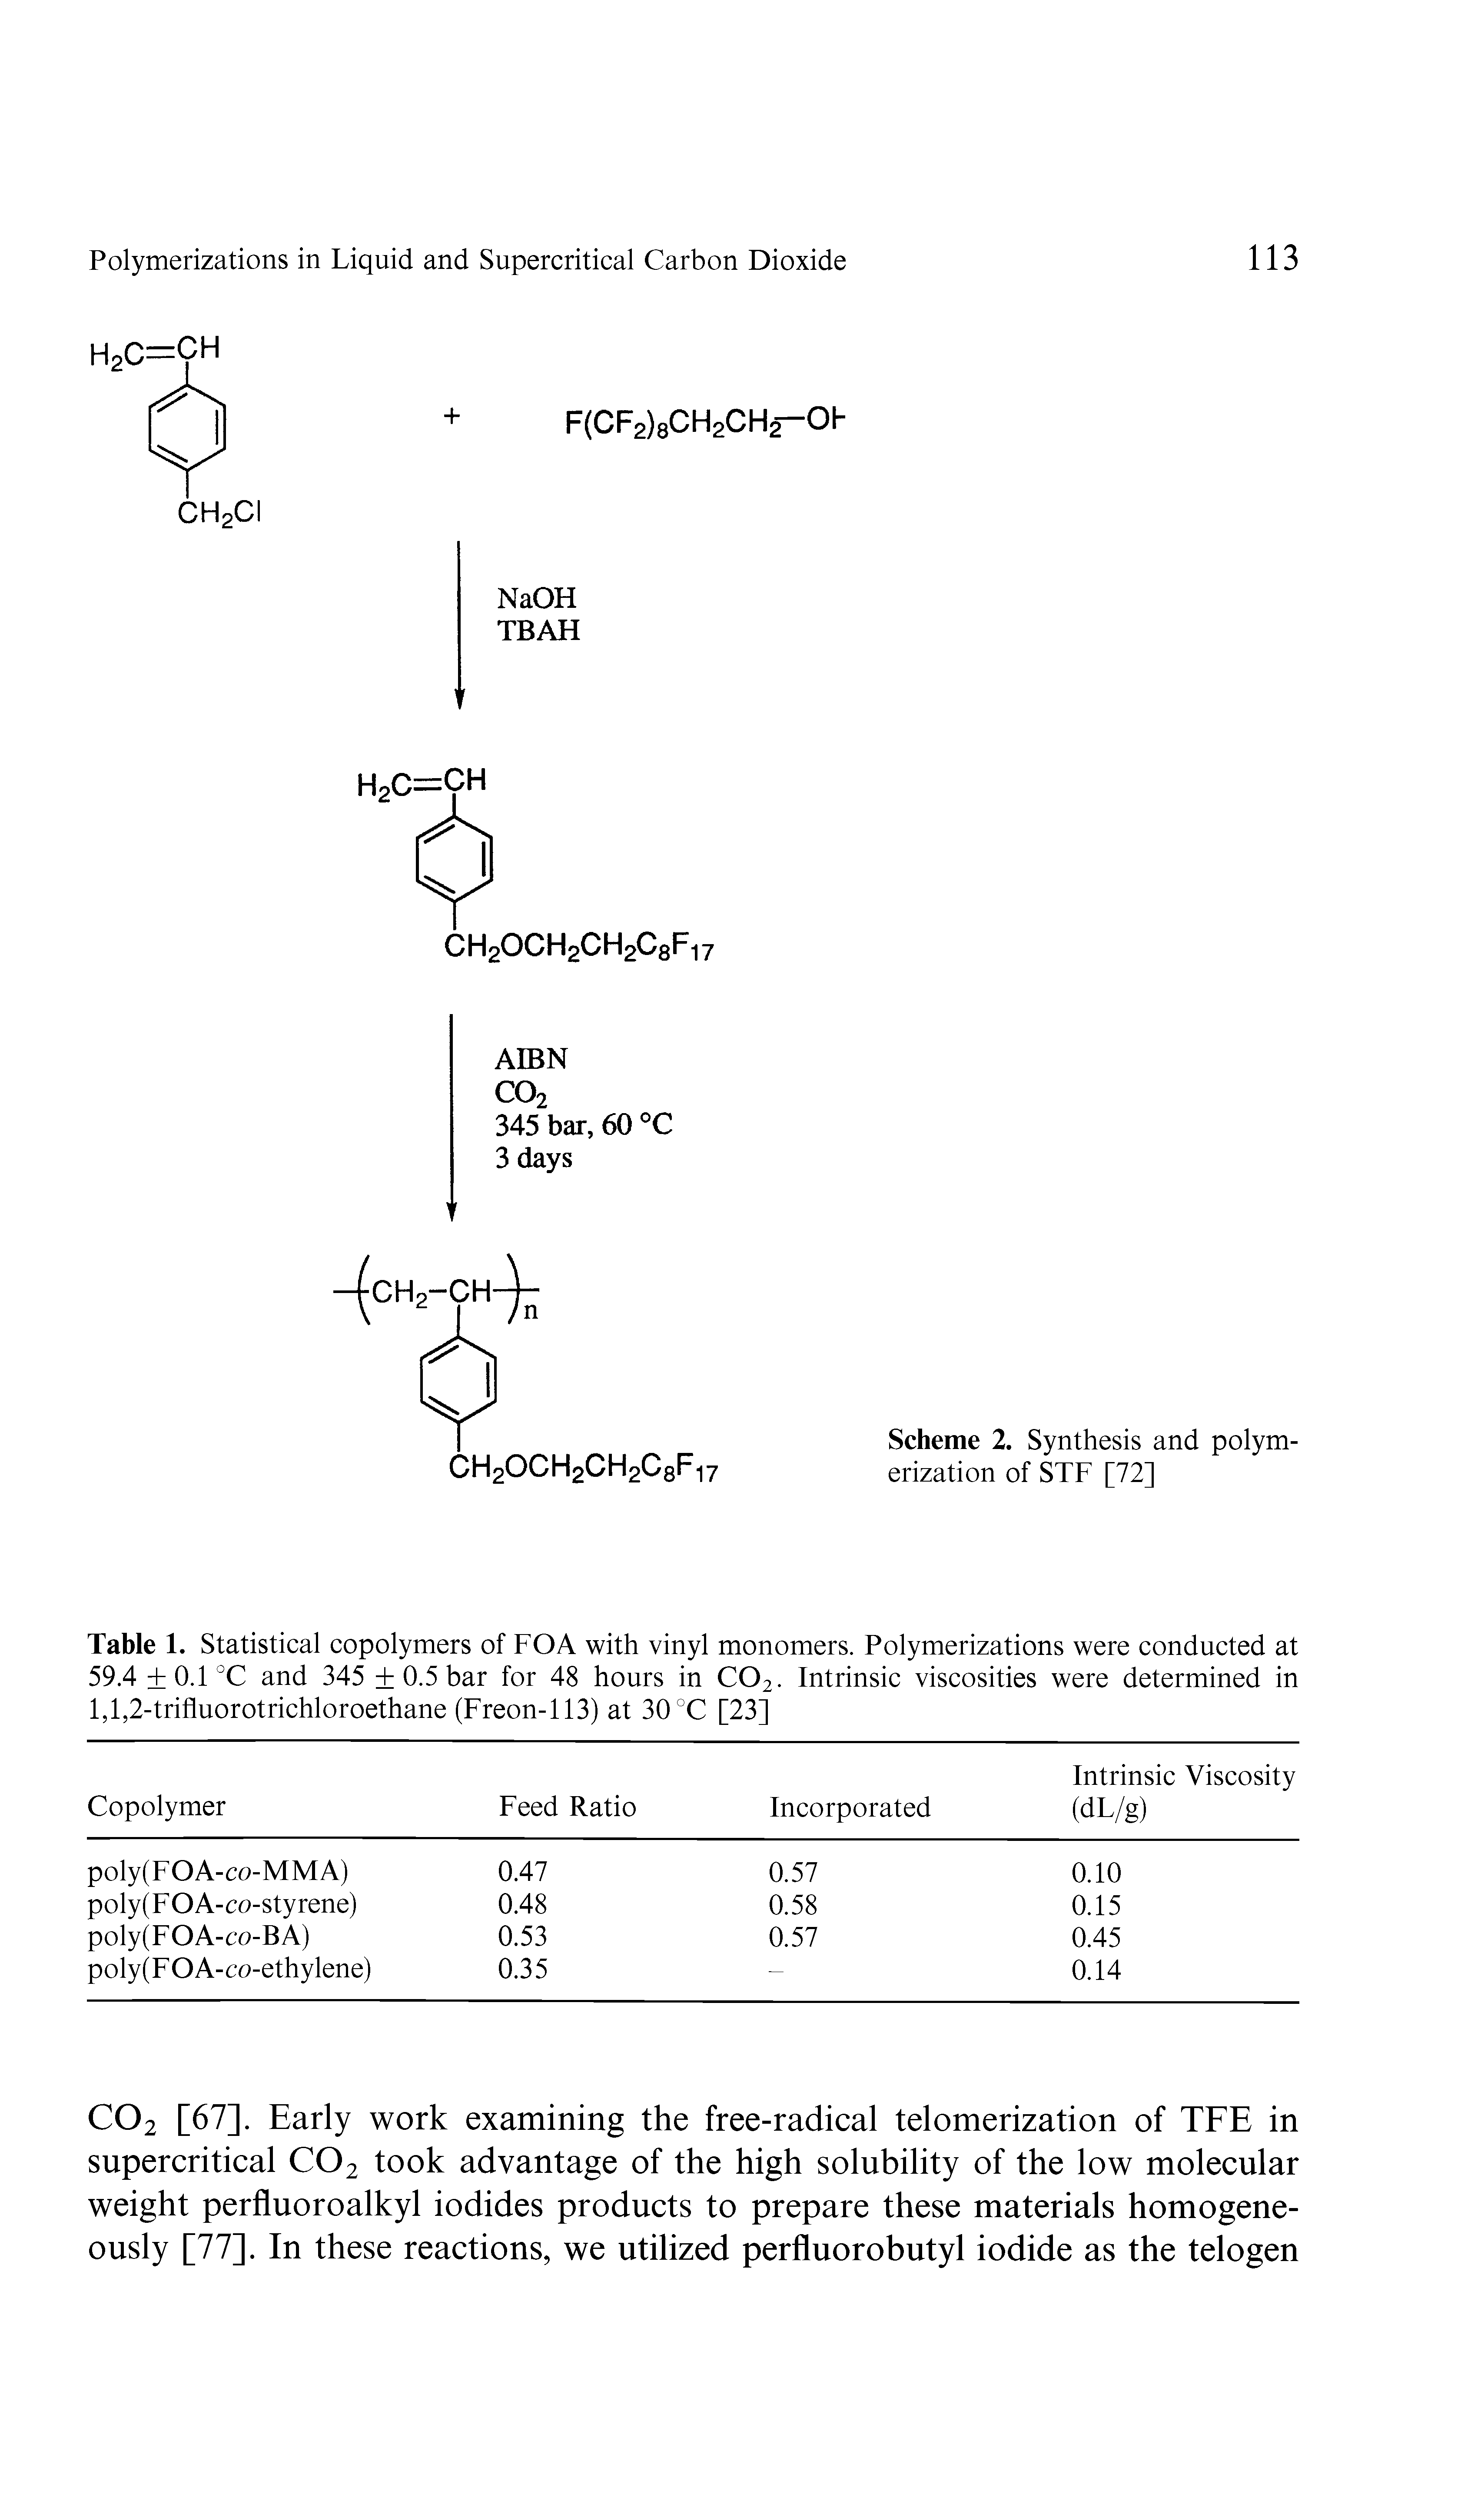 Table 1. Statistical copolymers of FOA with vinyl monomers. Polymerizations were conducted at 59.4 +0.1°C and 345 + 0.5 bar for 48 hours in C02. Intrinsic viscosities were determined in 1,1,2-trifluorotrichloroethane (Freon-113) at 30 °C [23]...